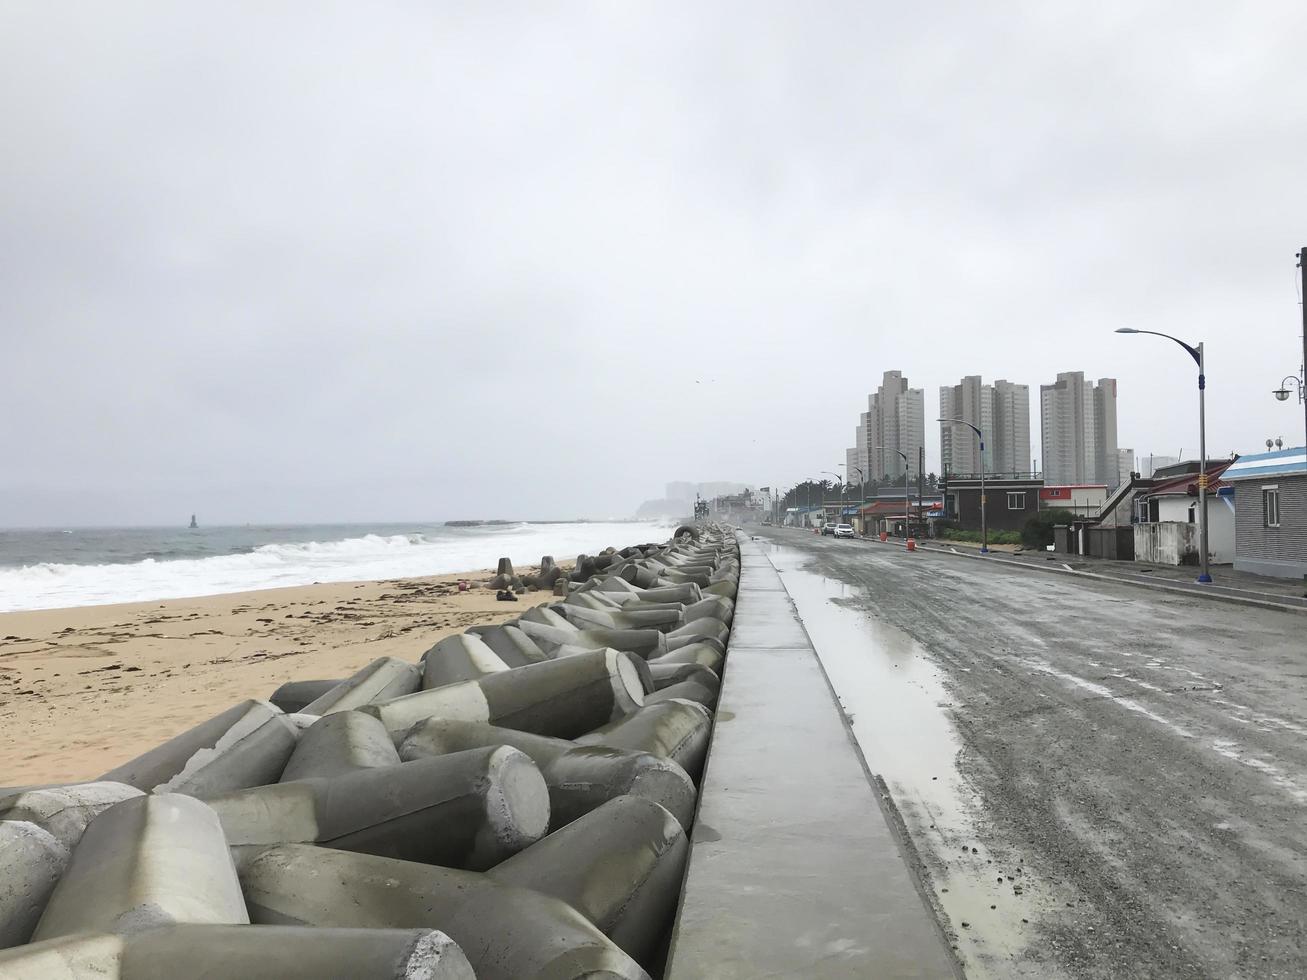 Sokcho city after the typhoon in South Korea. Bad weather on the sea photo